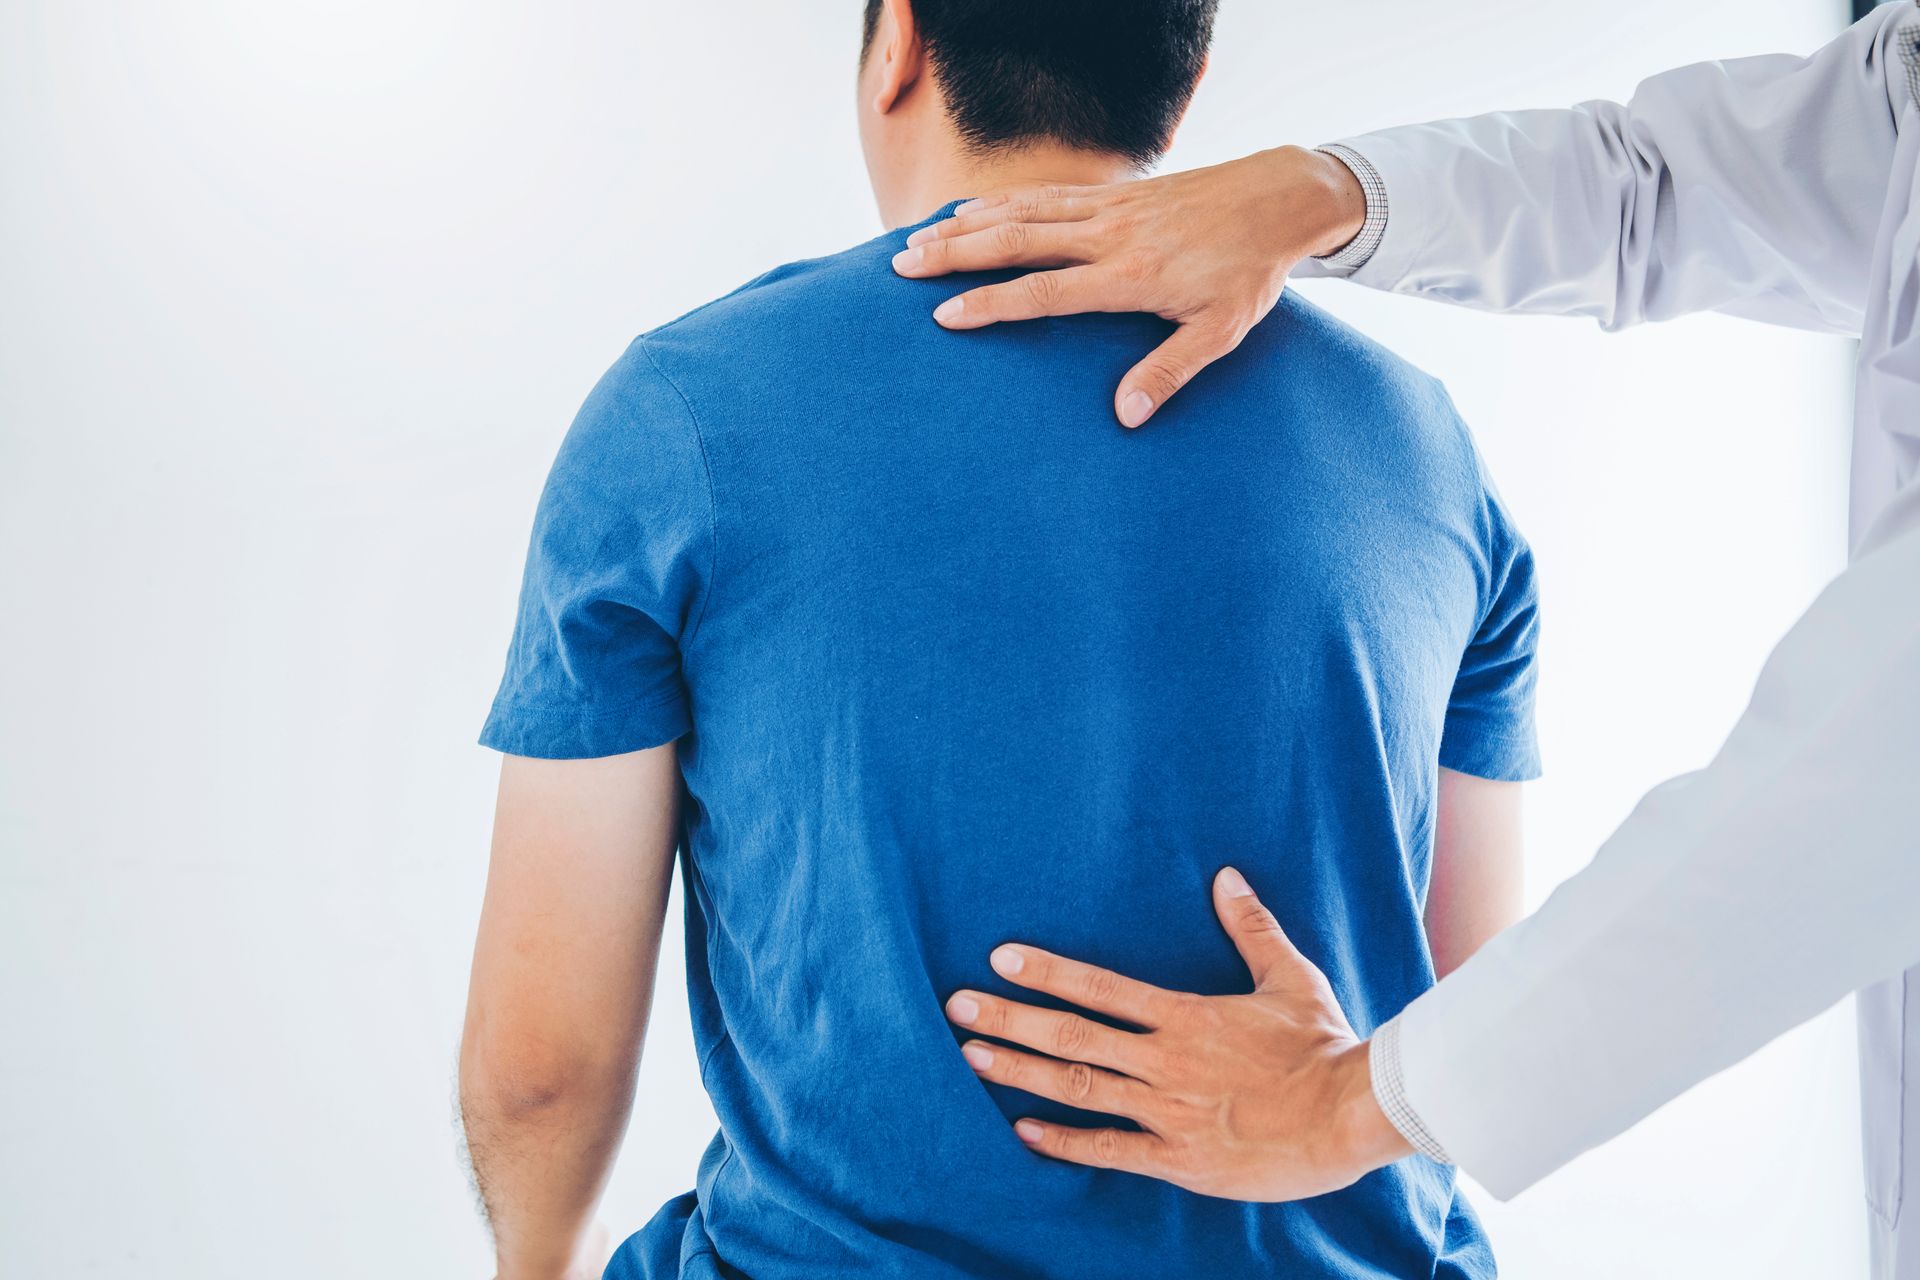 Chiropractor in St. Charles adjusting a patients neck